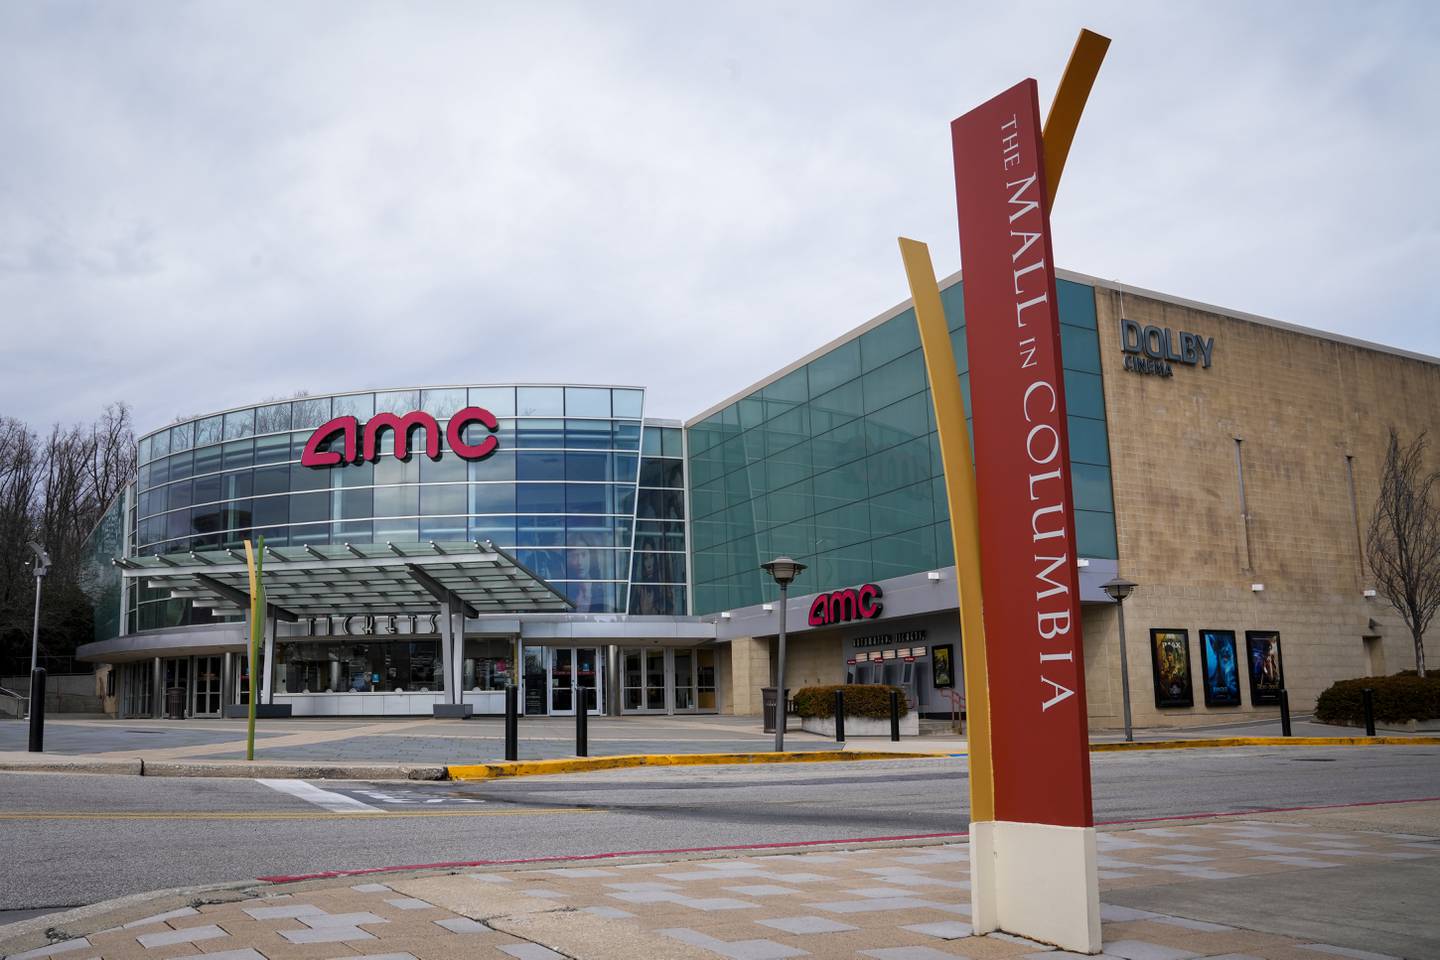 The exterior of the AMC movie theater at the Mall in Columbia on 2/13/23.